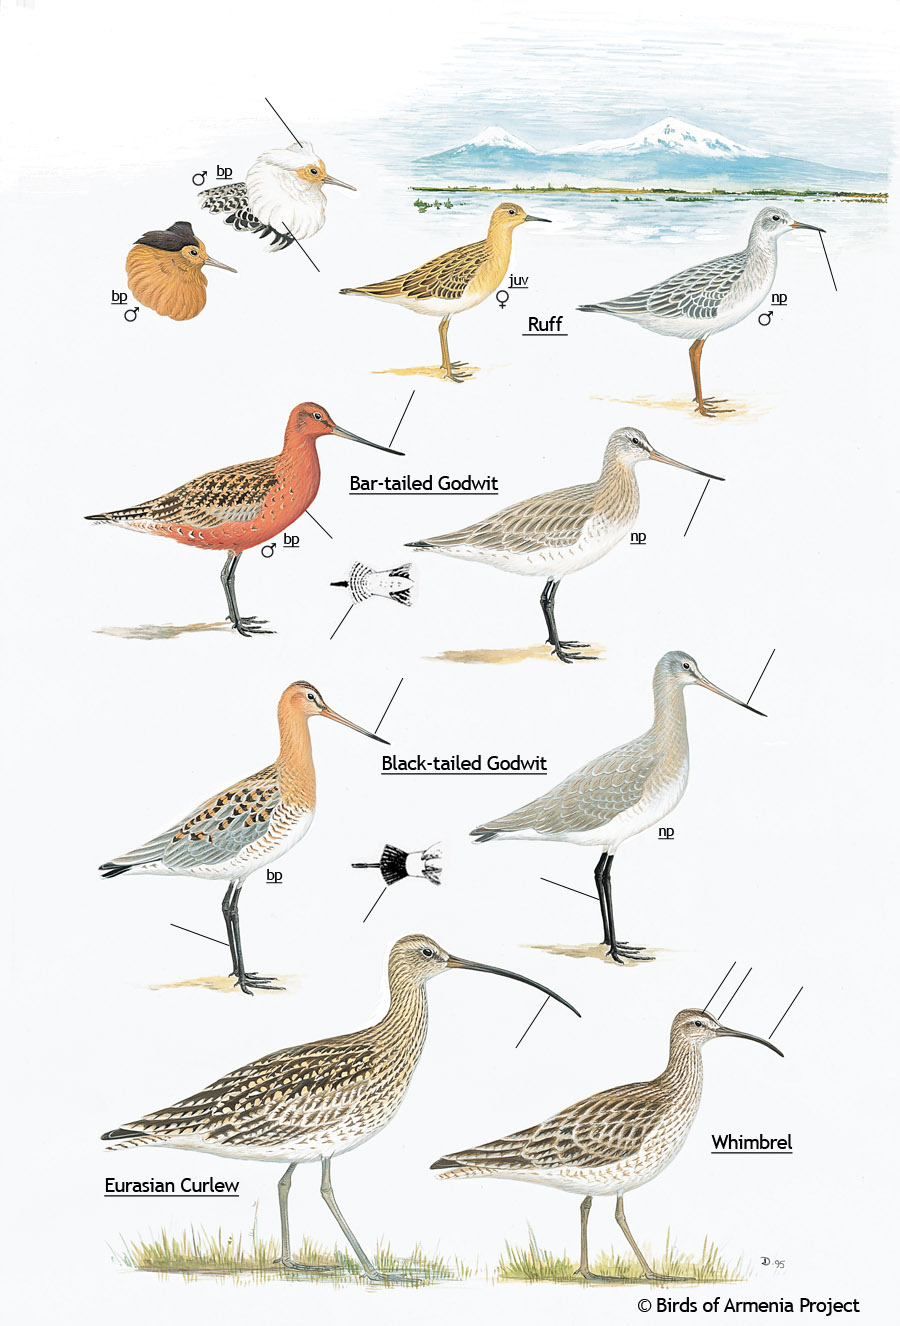 Ruffs, Godwits, Curlews and Whimbrels